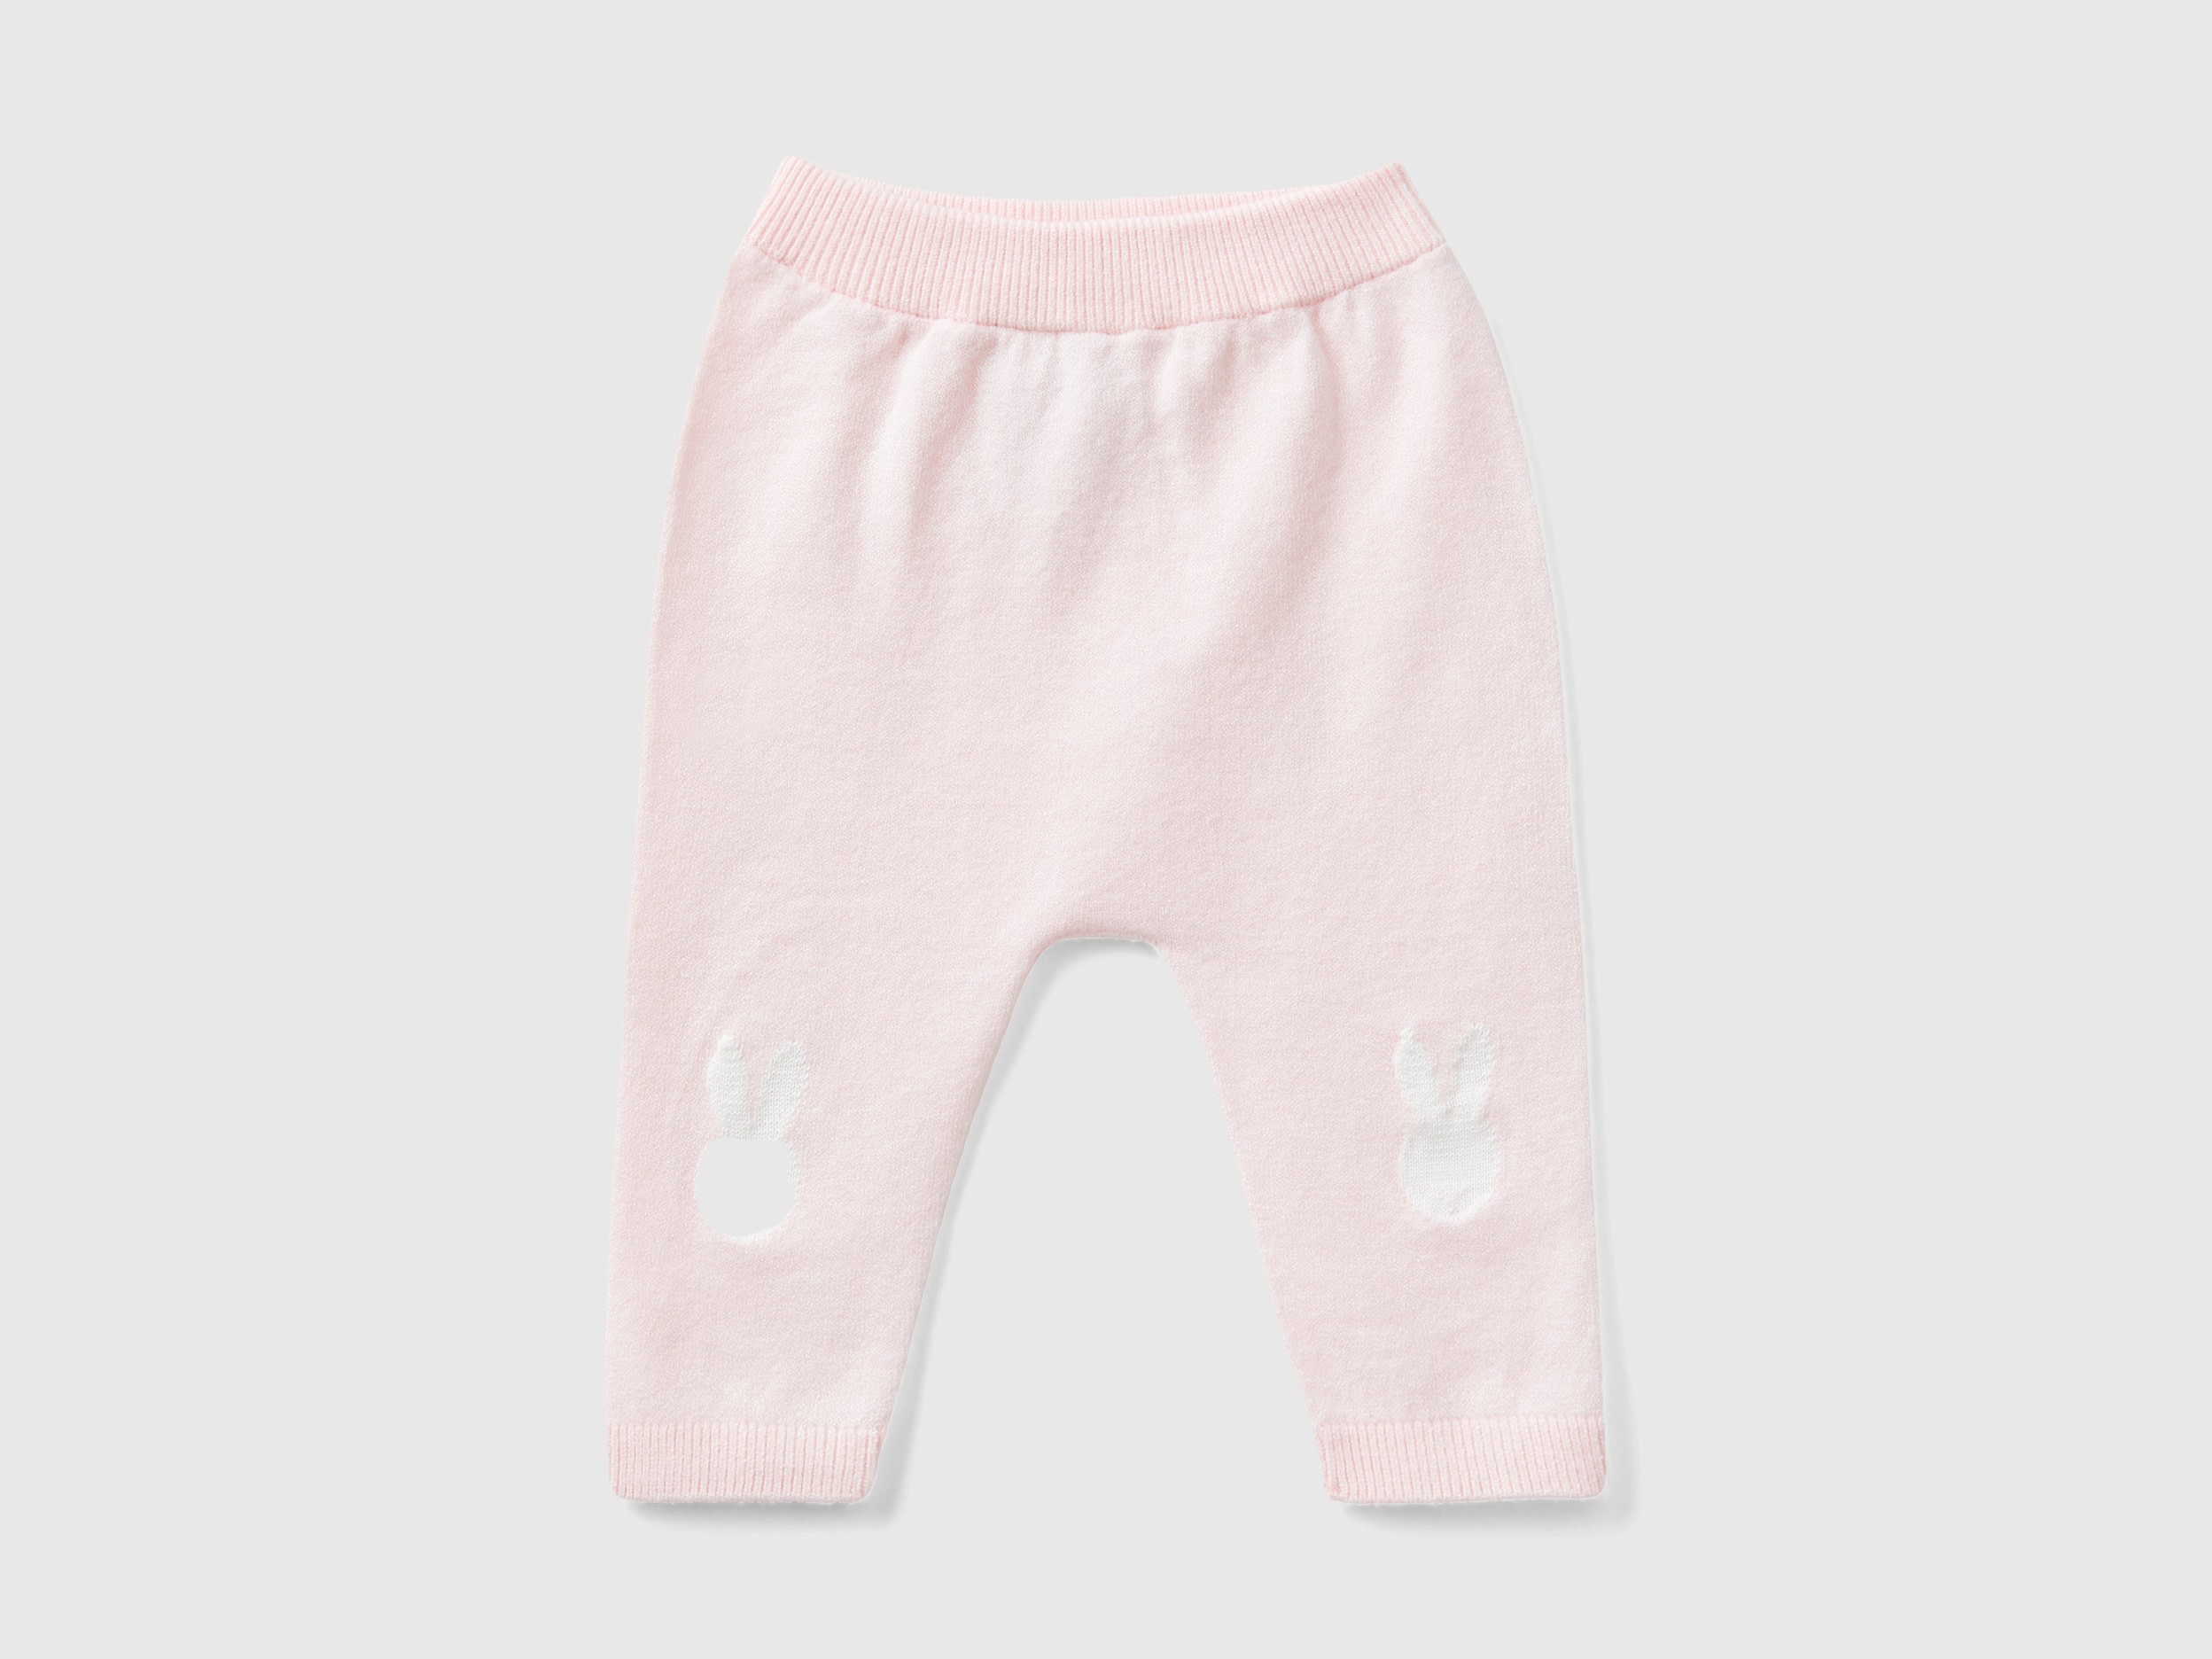 Benetton, Knit Trousers With Inlay, size 0-1, Soft Pink, Kids